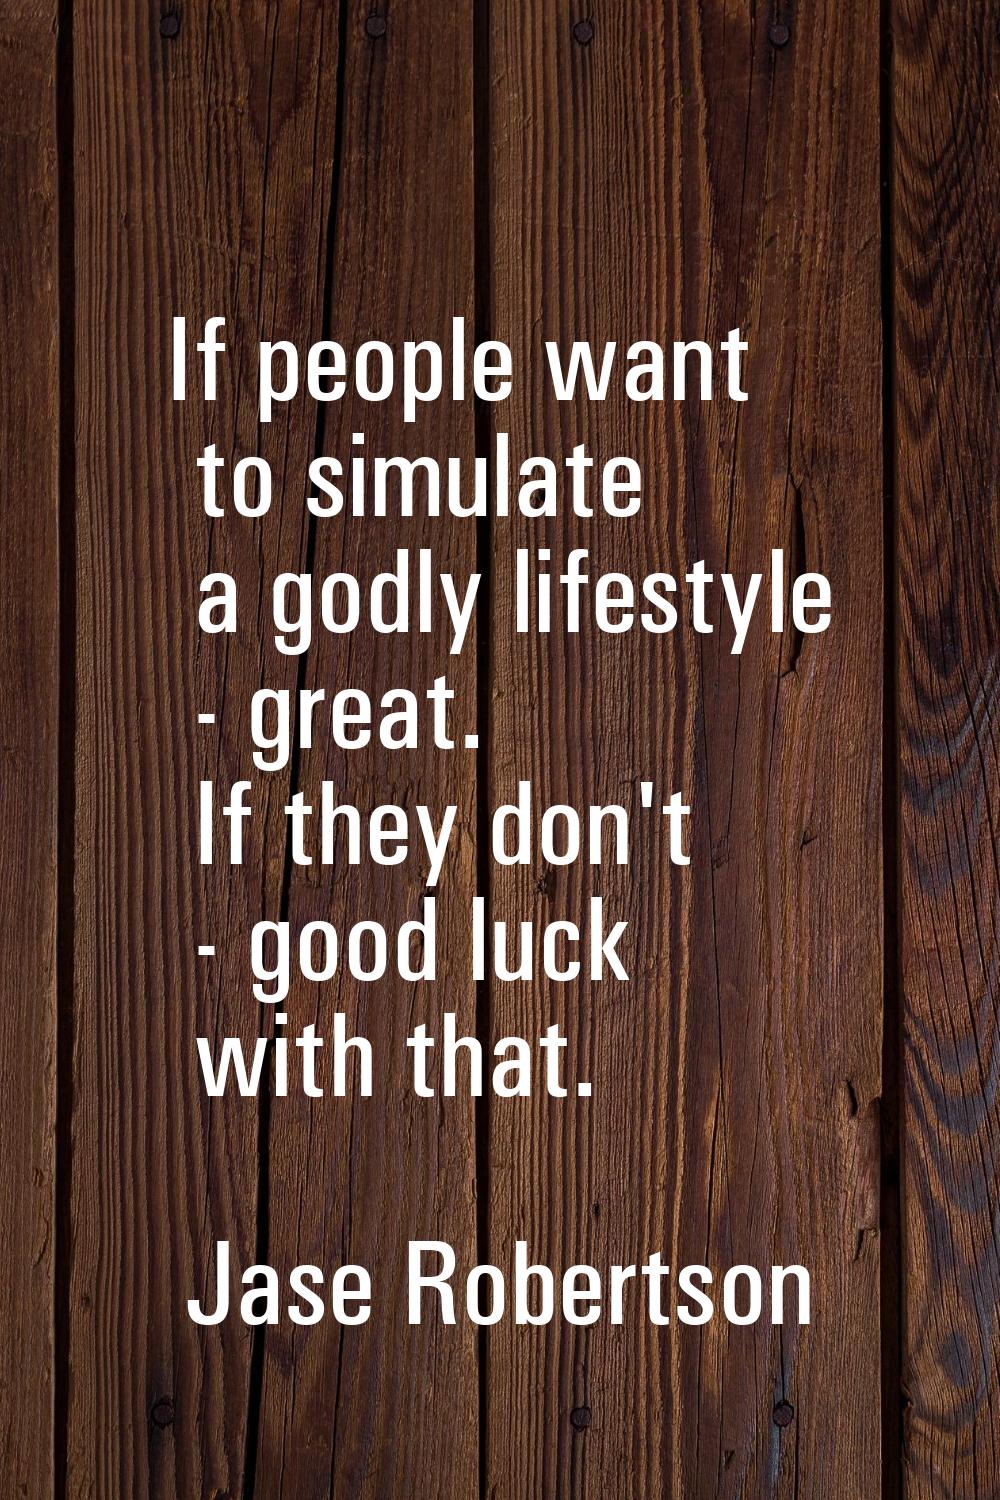 If people want to simulate a godly lifestyle - great. If they don't - good luck with that.